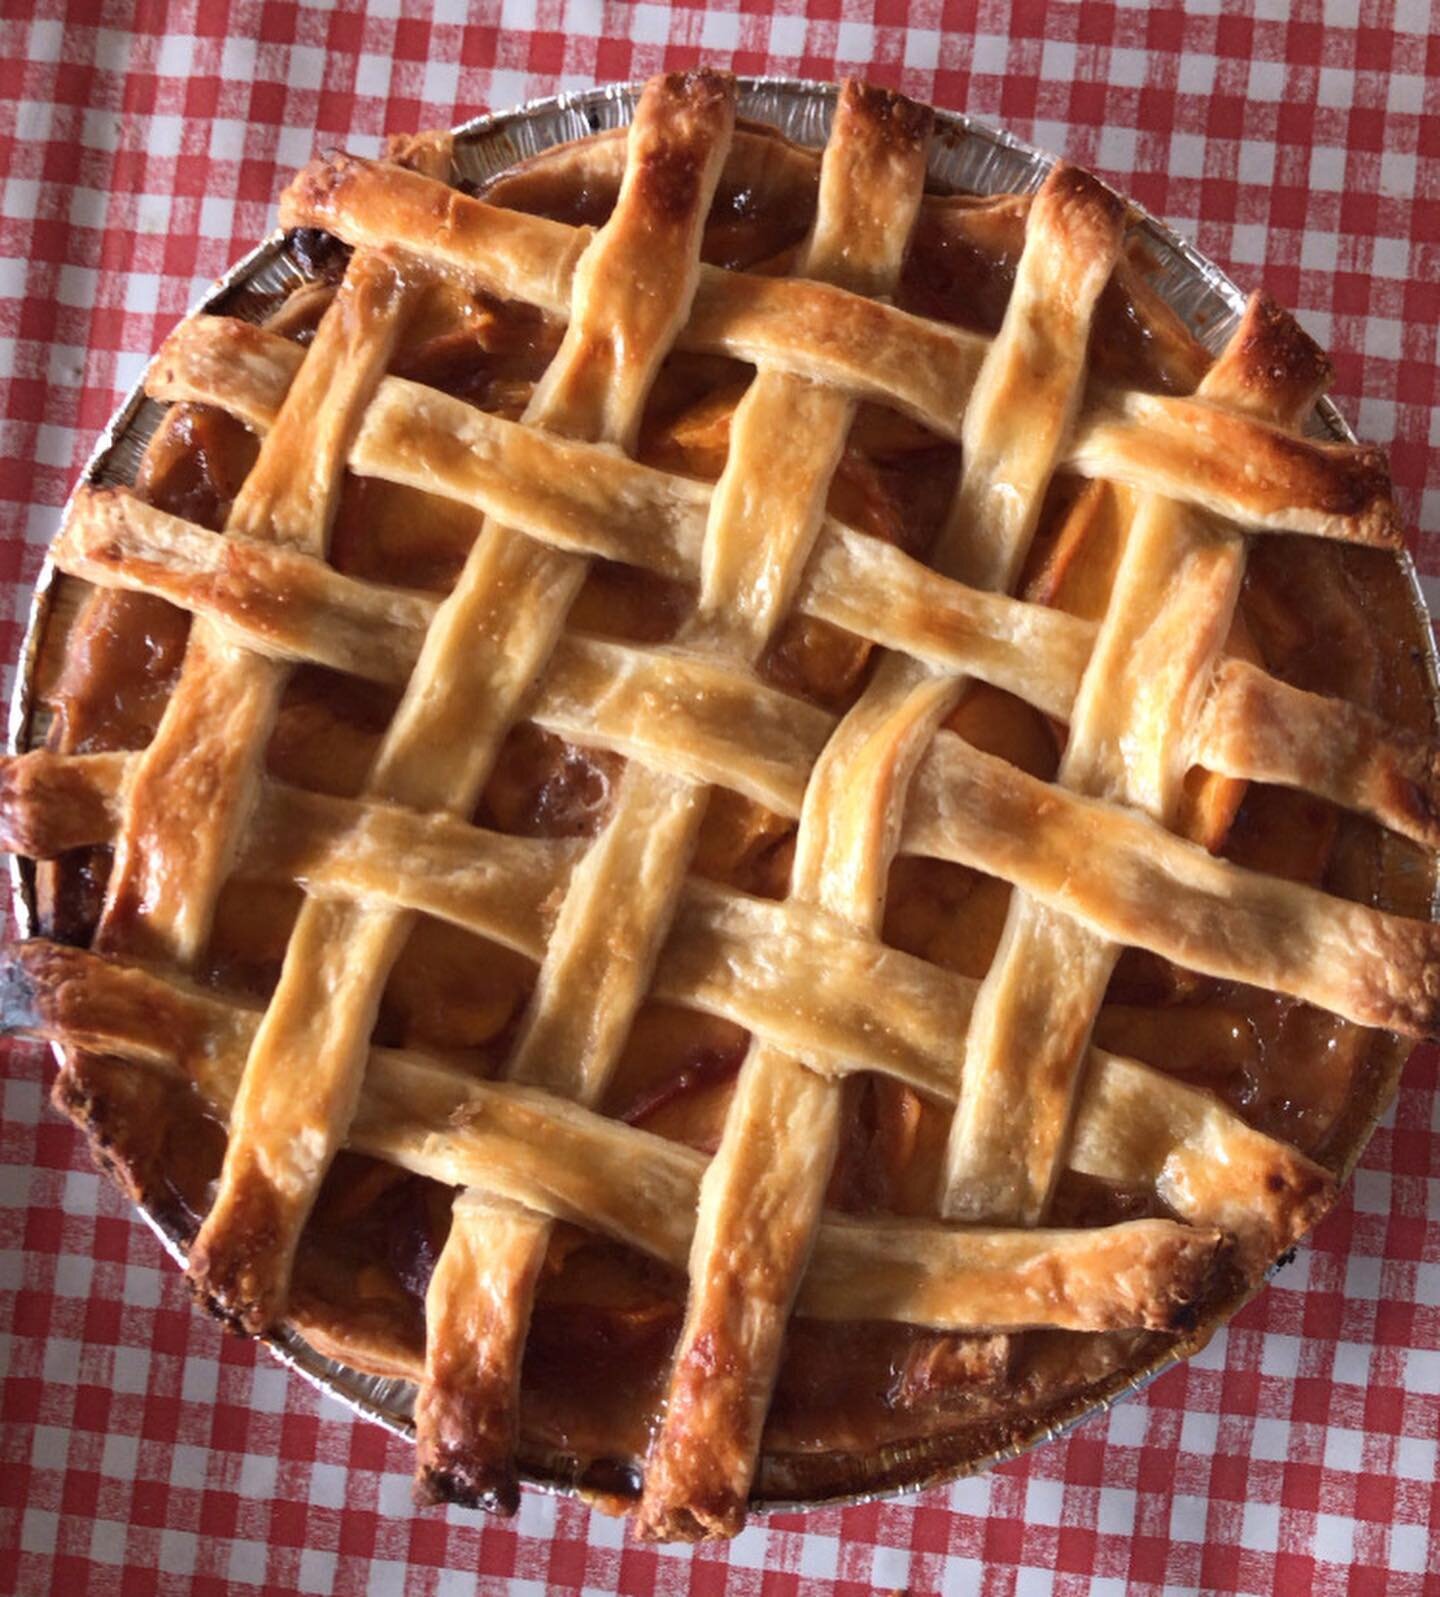 Let&rsquo;s meet the lineup!

Peach
Peach Strawberry 
Peach Blueberry
Classic Apple

@cleodnine&rsquo;s lattice weave and braiding details are to pieeee for 🥧🍎🍑🥧